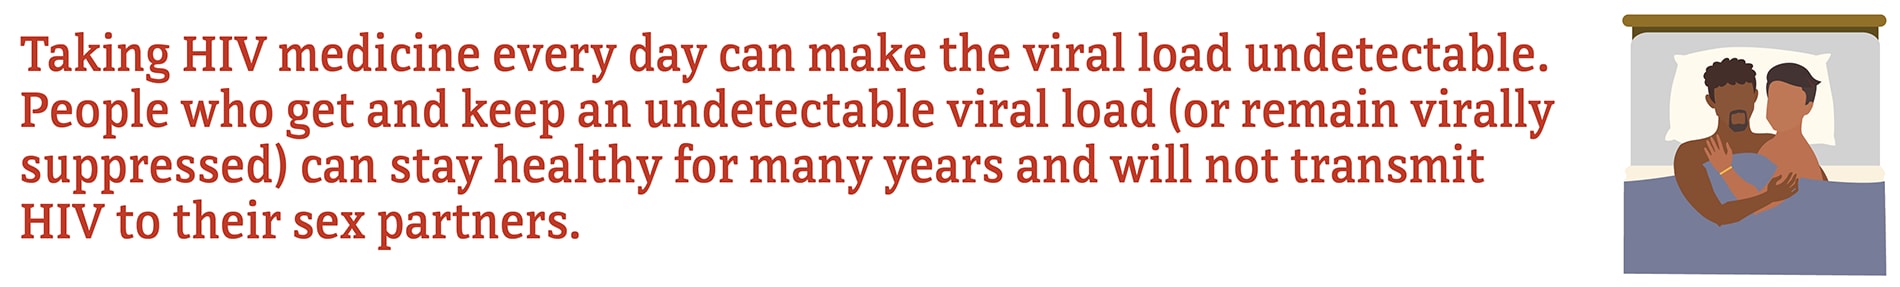 Taking HIV medicine every day can make the viral load undetectable.